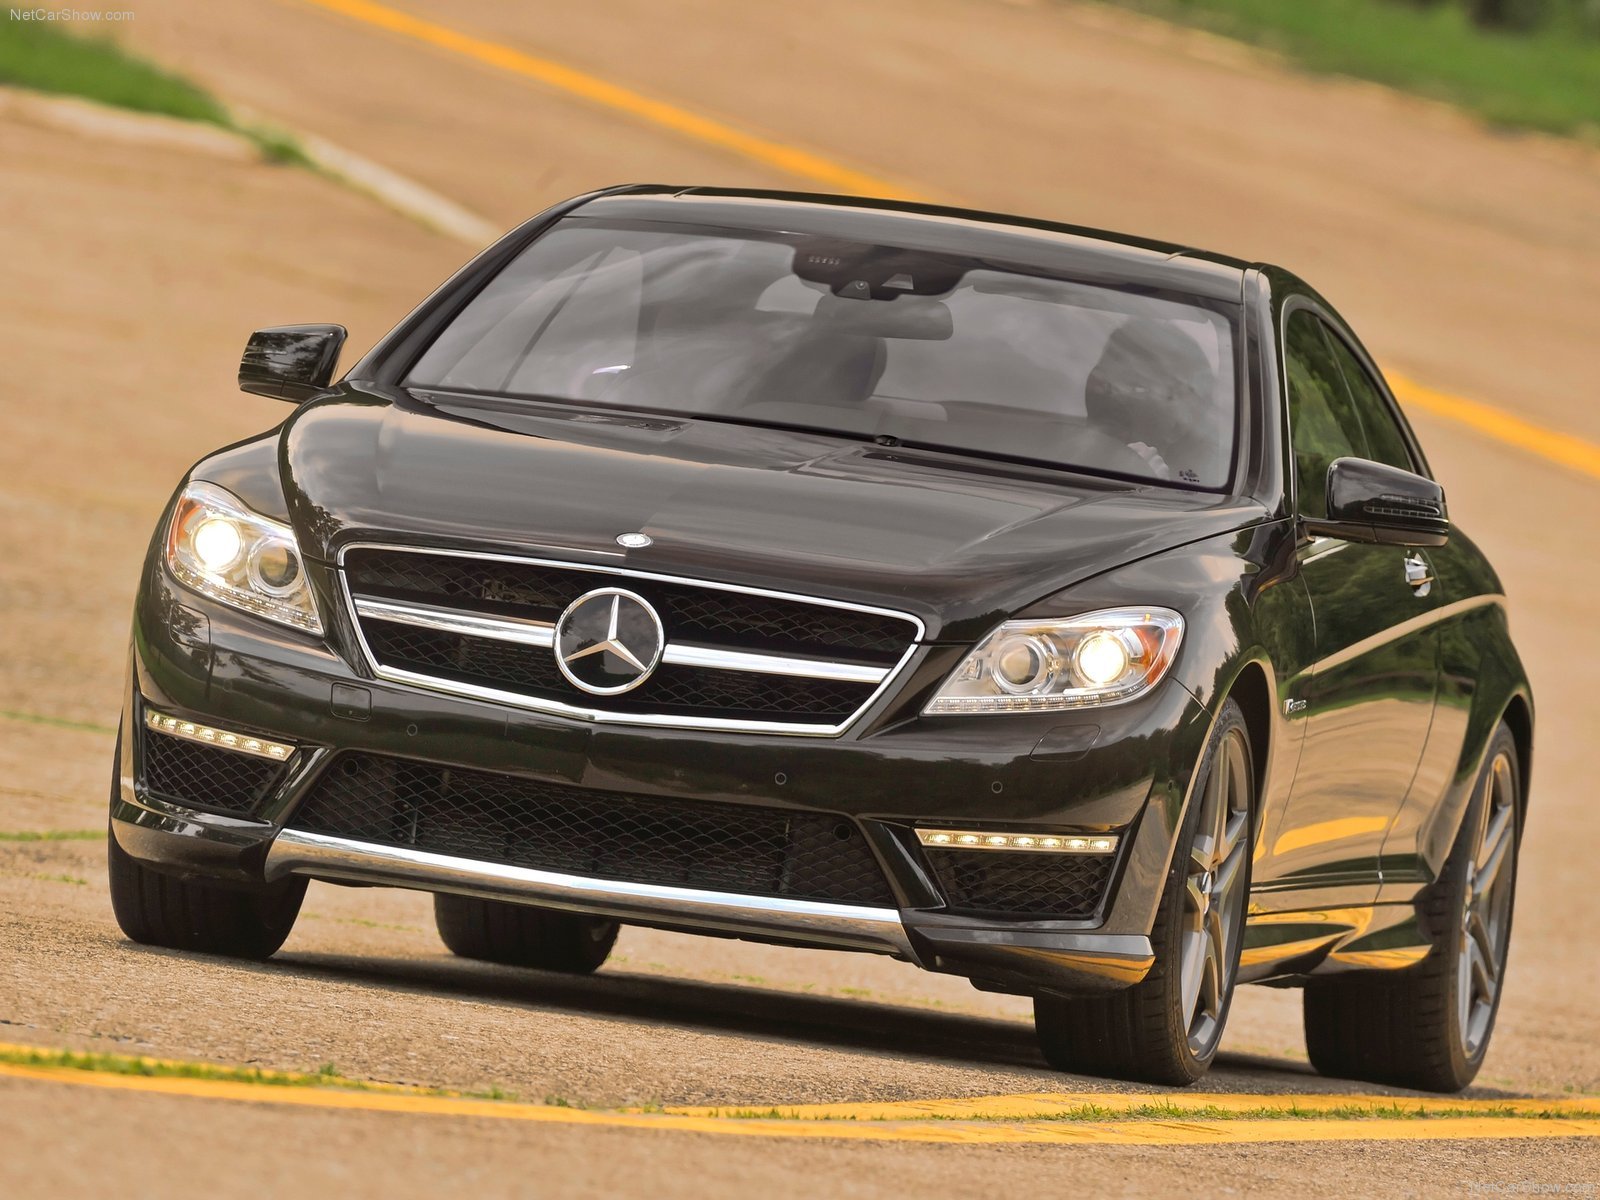 mercedes benz, Cl65, Amg, Cars, Coupe, 2011 Wallpaper